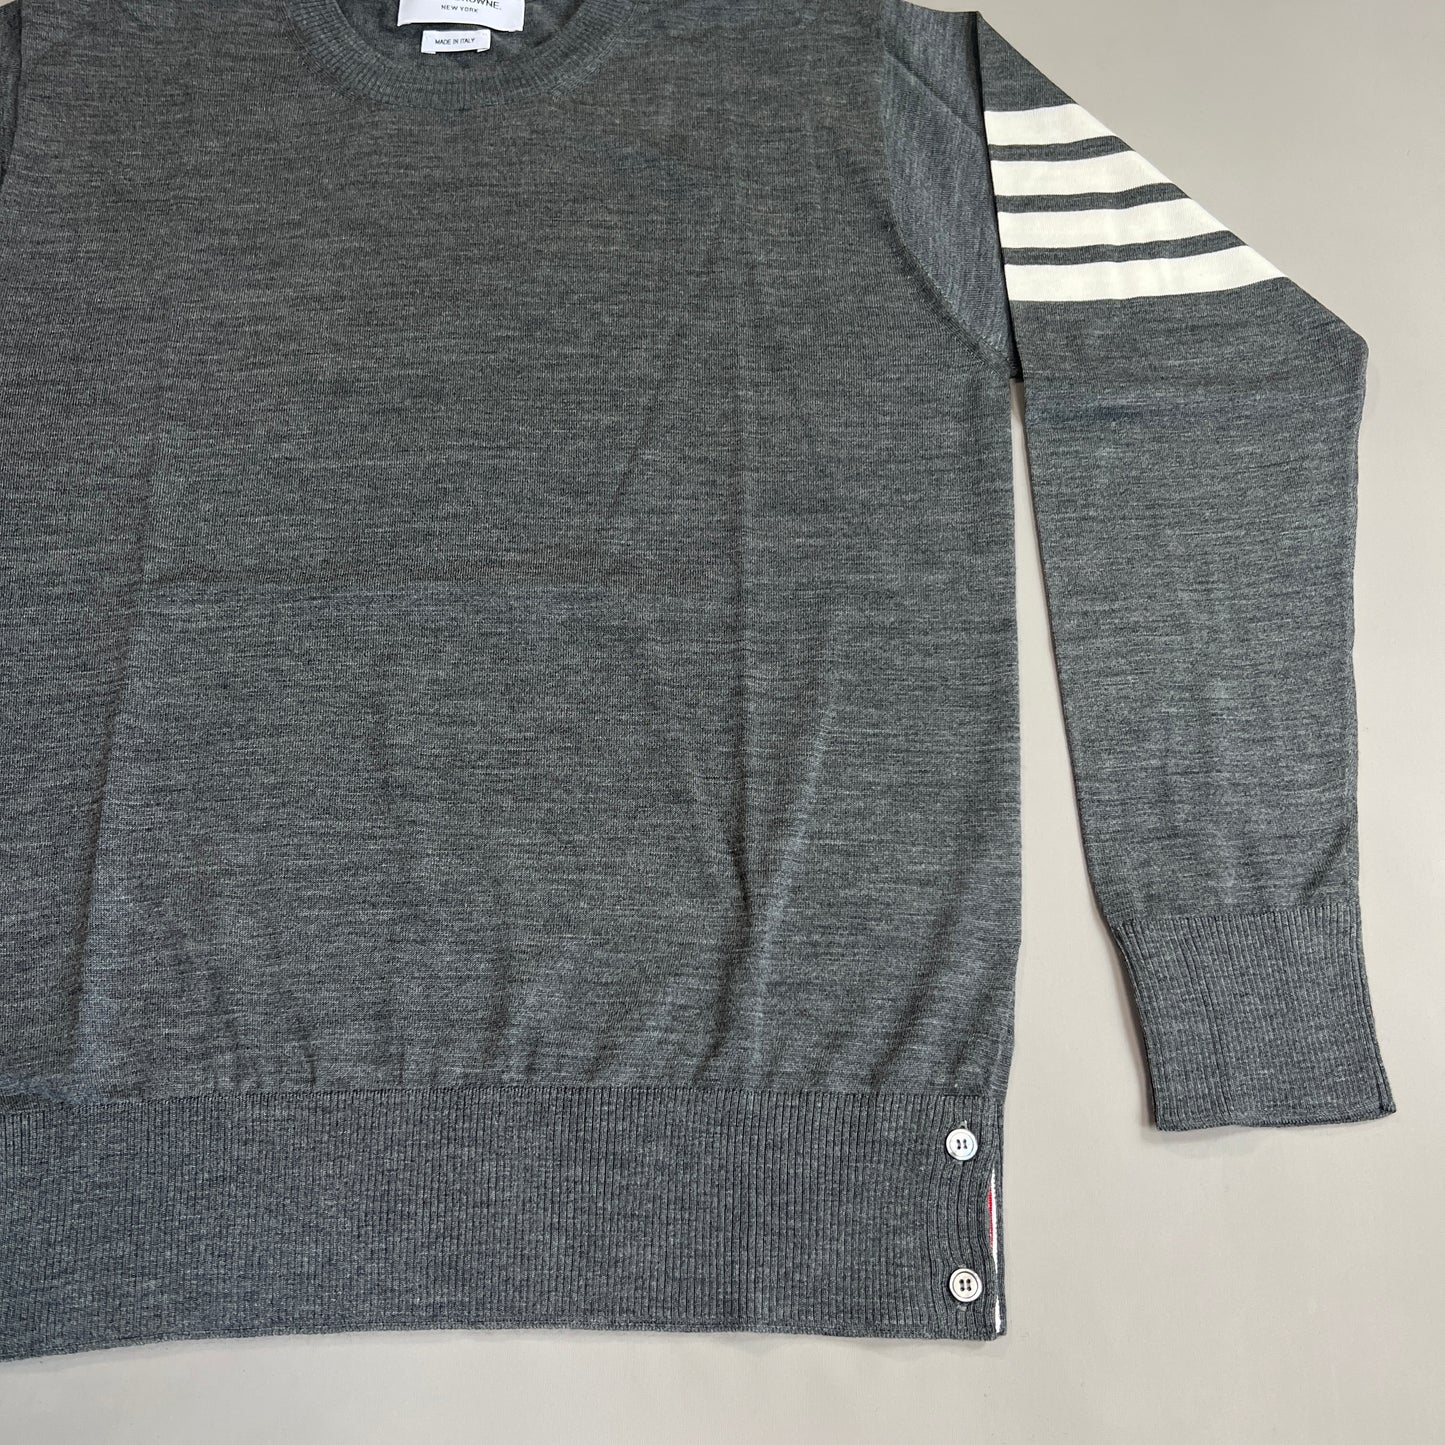 THOM BROWNE New York Classic Crewneck Pullover w/4 Bar Sleeve in Sustainable Fine Merino Wool Med Grey Size 1 (New)